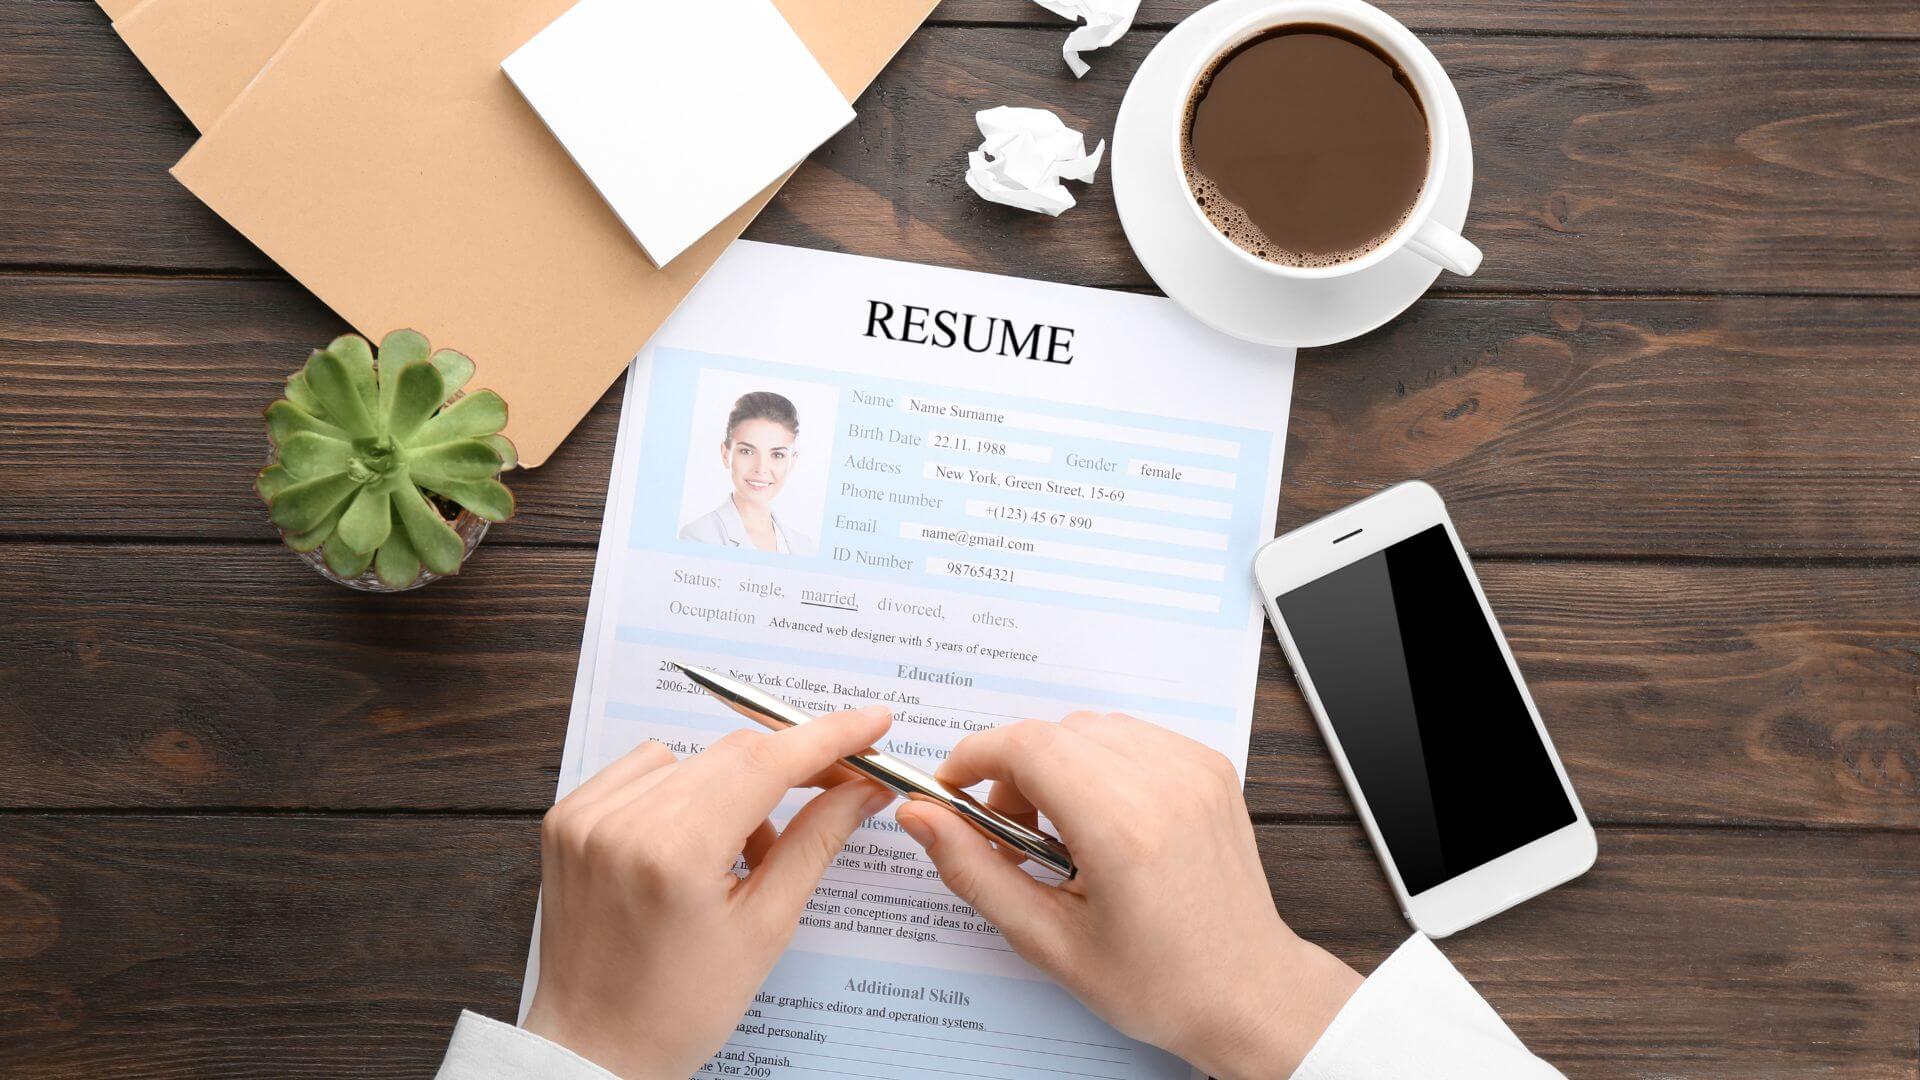 Tailoring Your Resume Key to Job Search Success